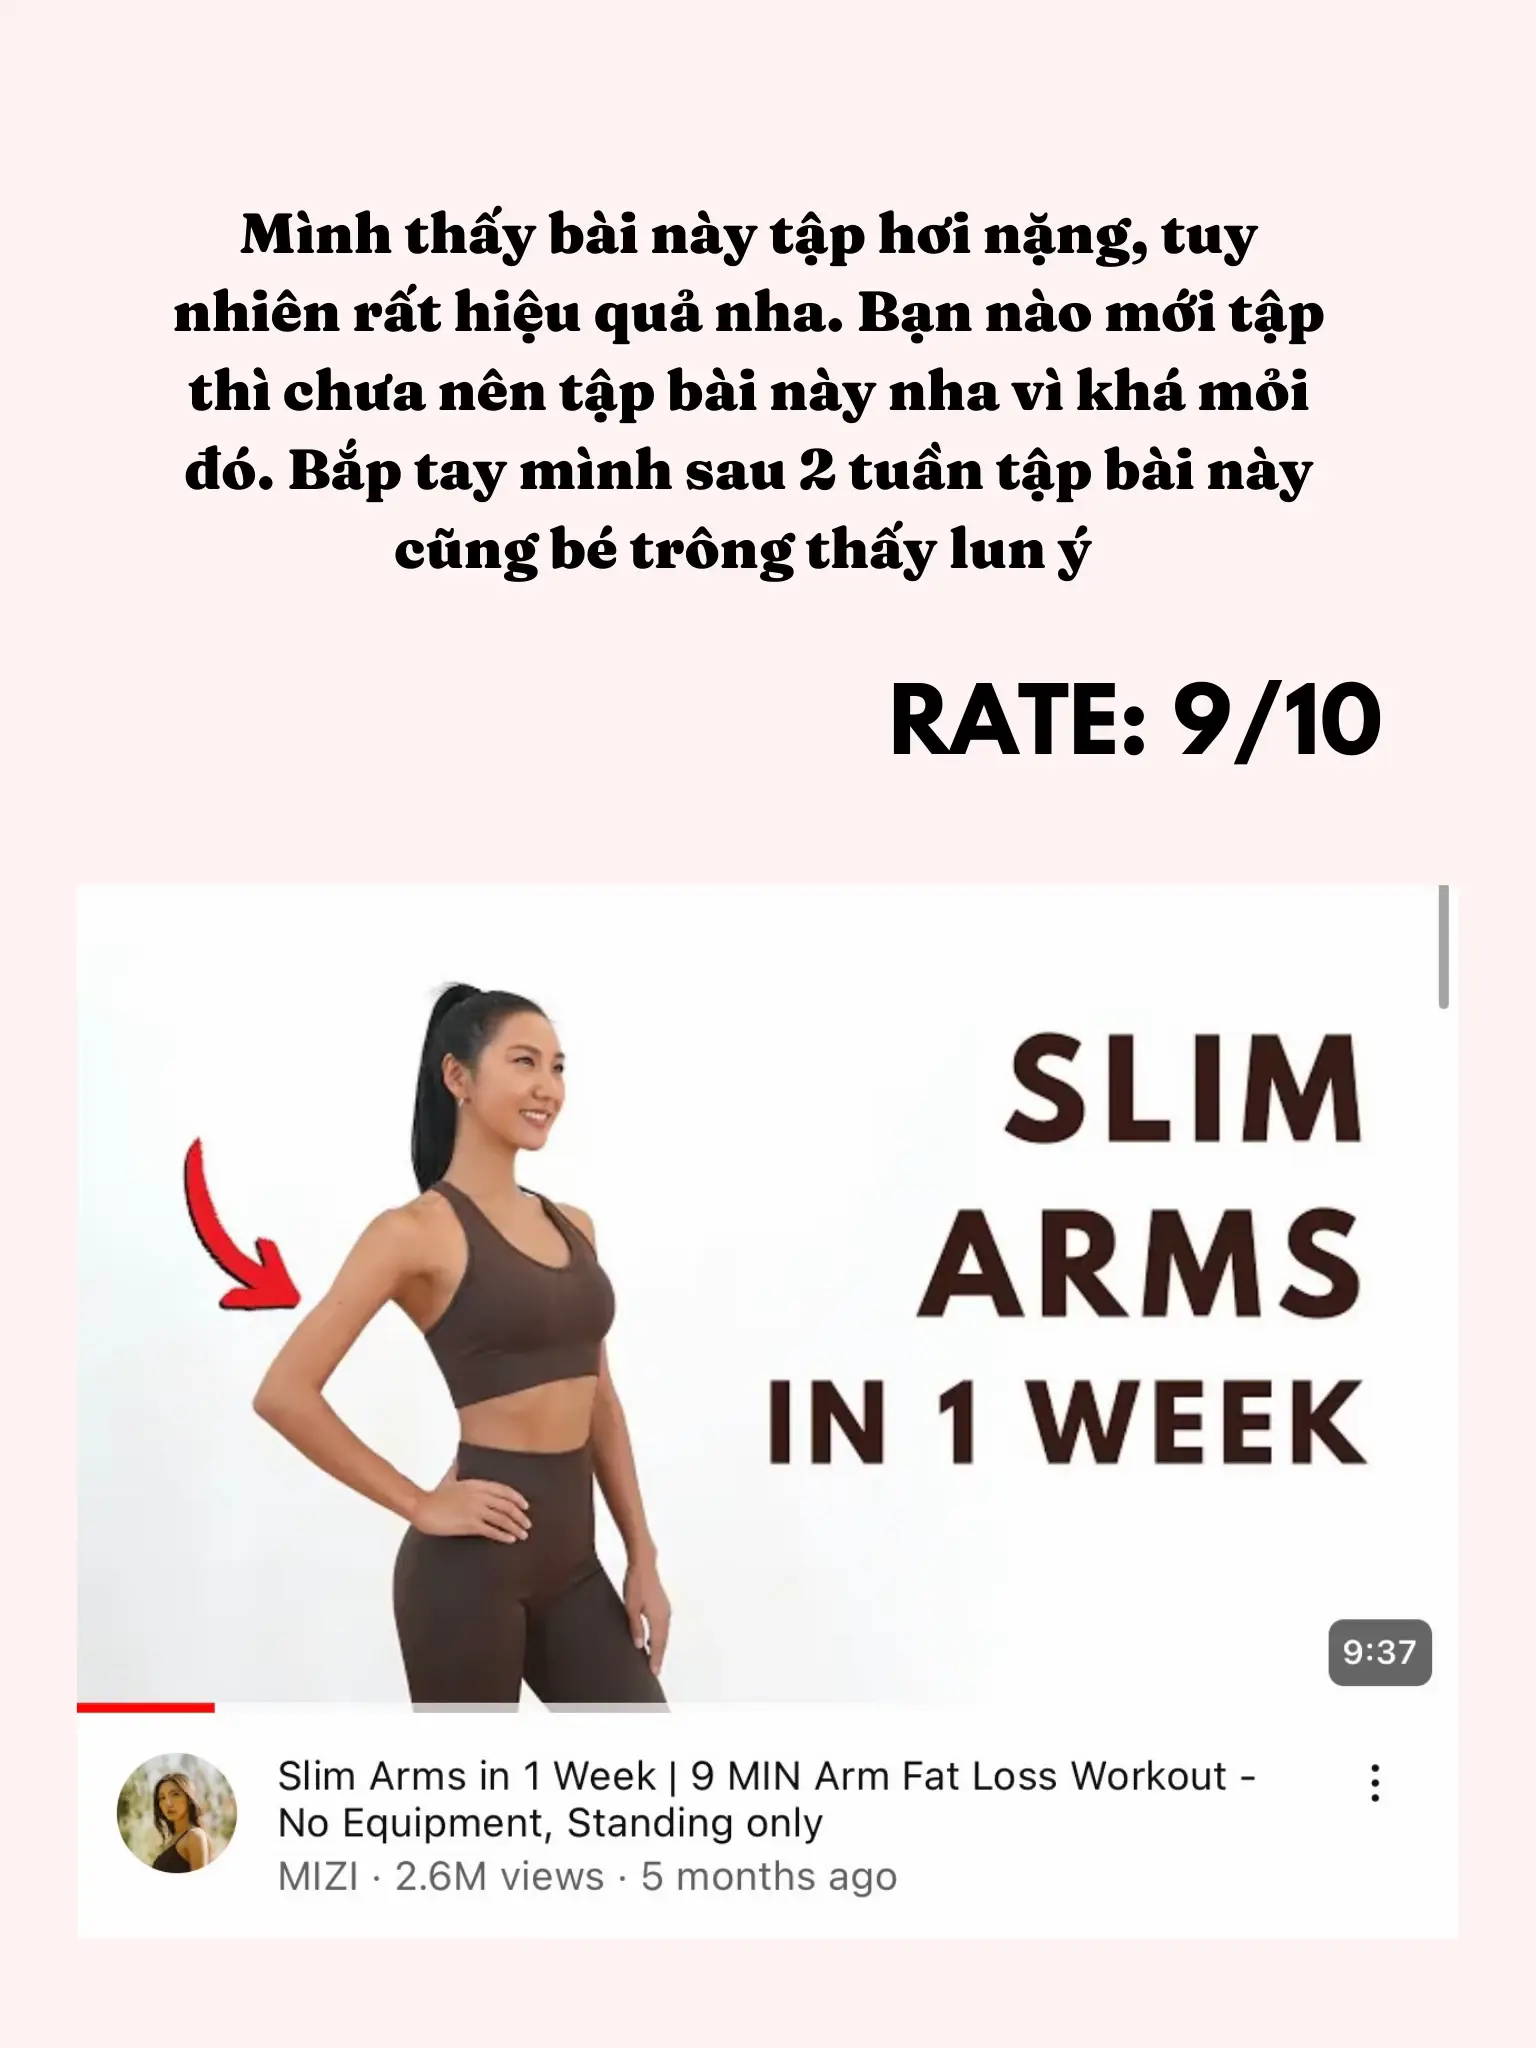 Slim Arms in 1 Week  9 MIN Arm Fat Loss Workout - No Equipment, Standing  only 